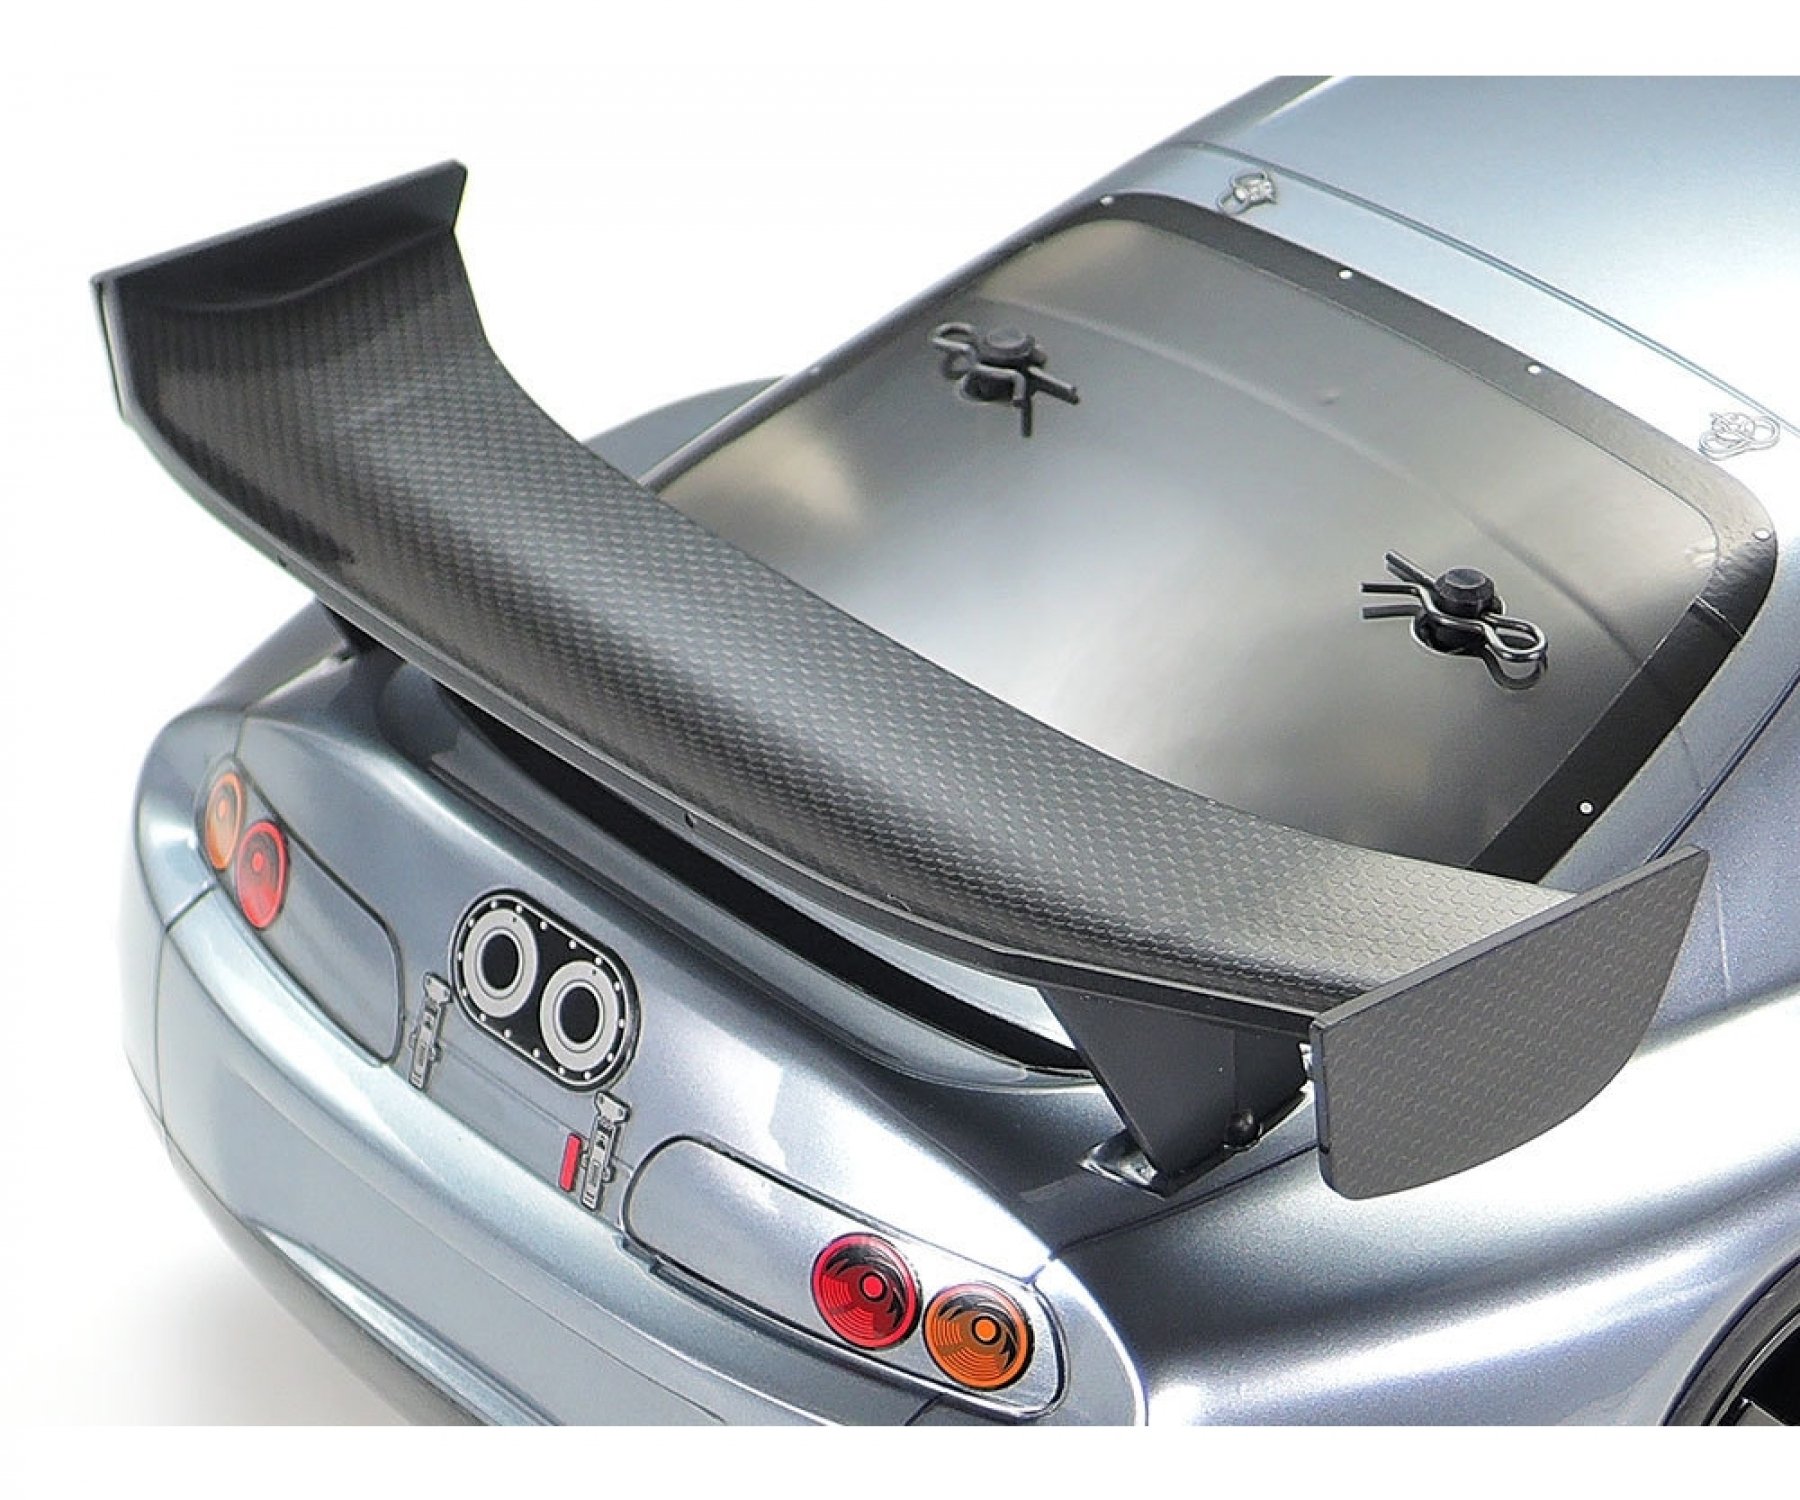 A big wing catches the eye at the rear of the model, with carbon fibre pattern sticker supplied.